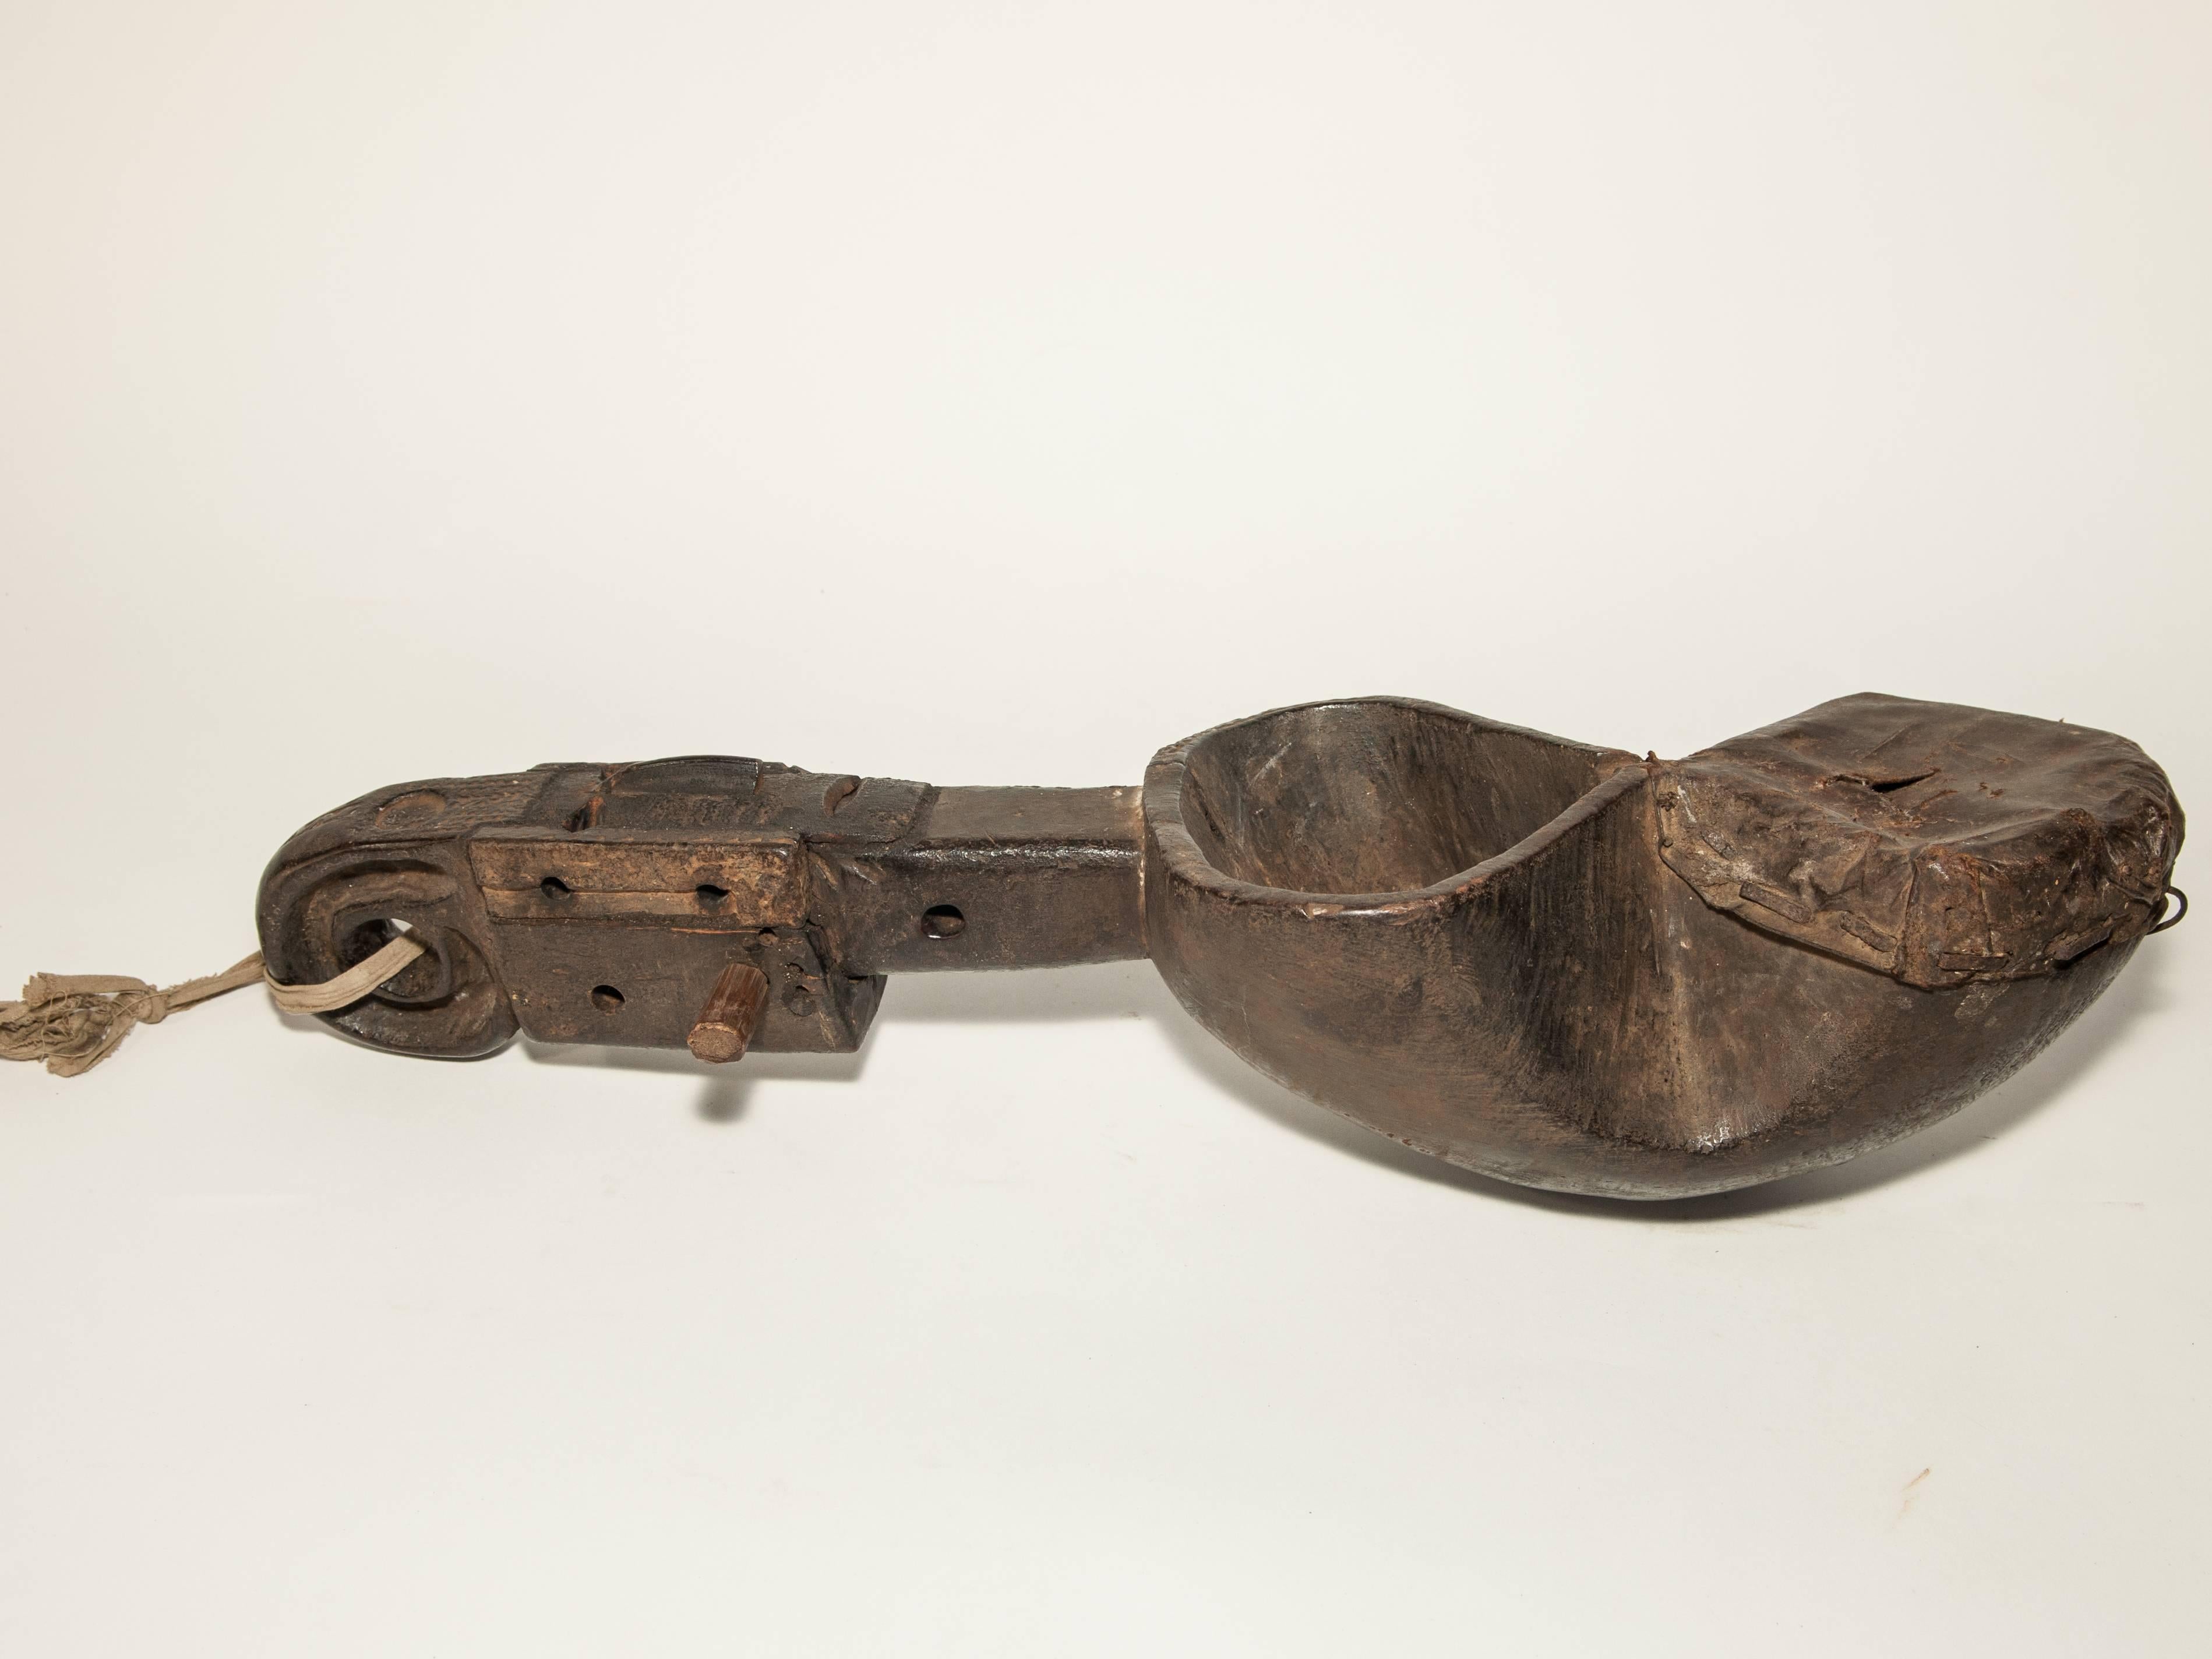 Nepalese Tribal Hand-Carved Lute or Sarangi, Gaine of Nepal Himal, Early 20th Century.